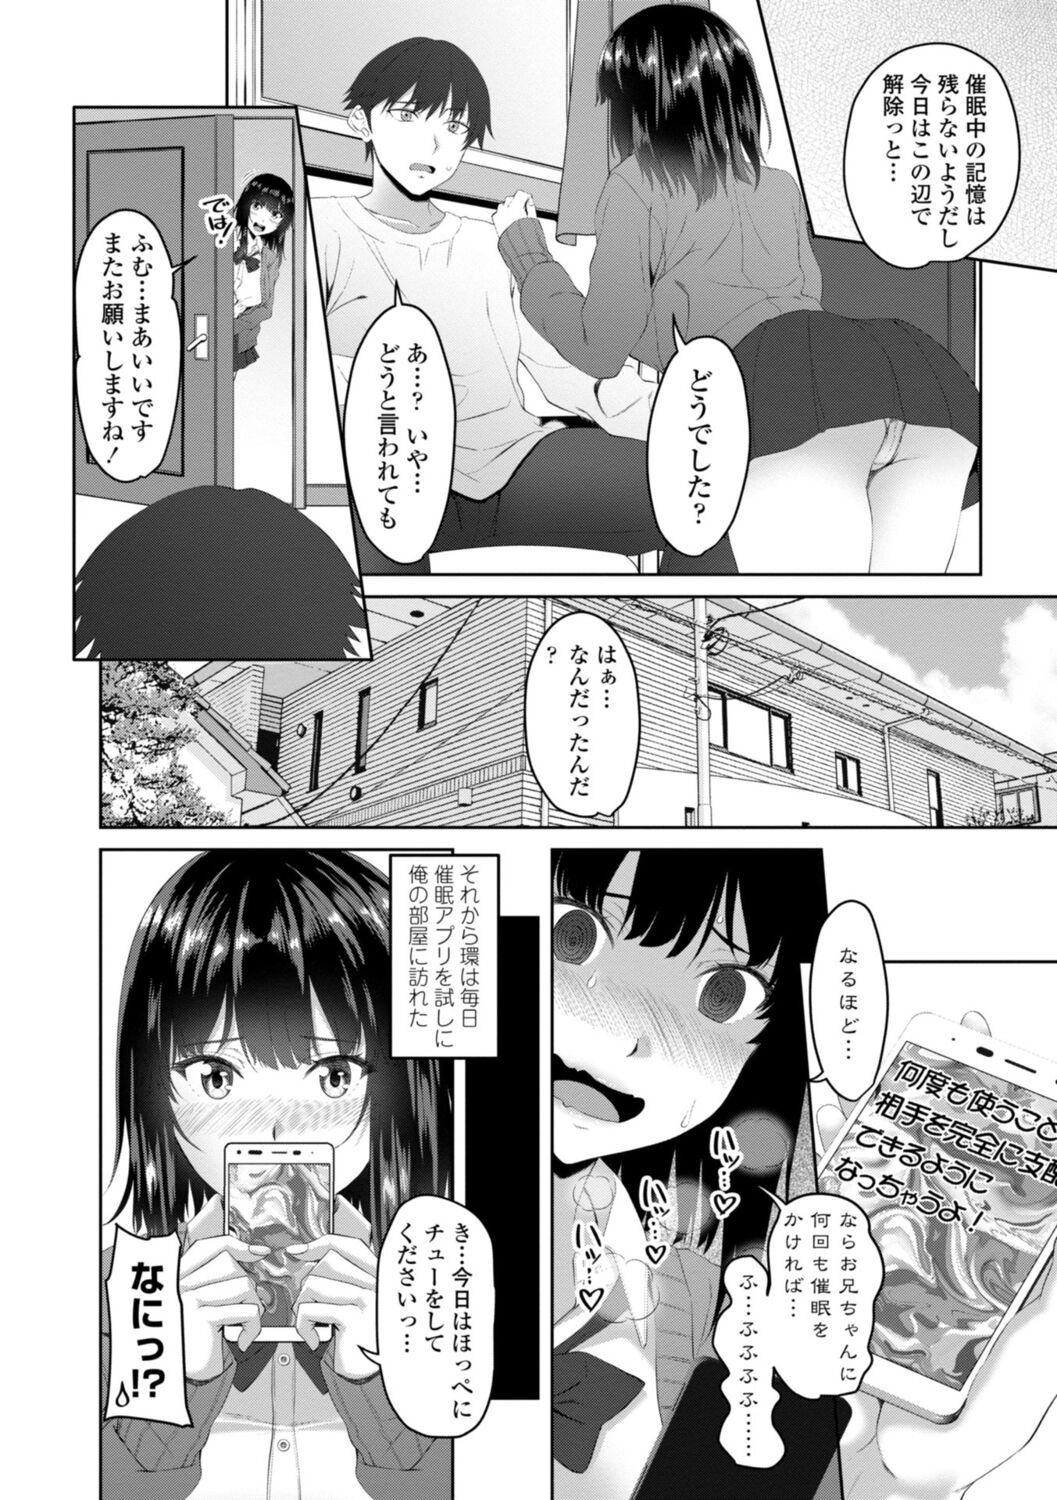 Gay Bukkakeboy [Arsenal] Onii-chan no H na Otoshikata - How to make your brother like you for sex. [Digital] Gay Baitbus - Page 8